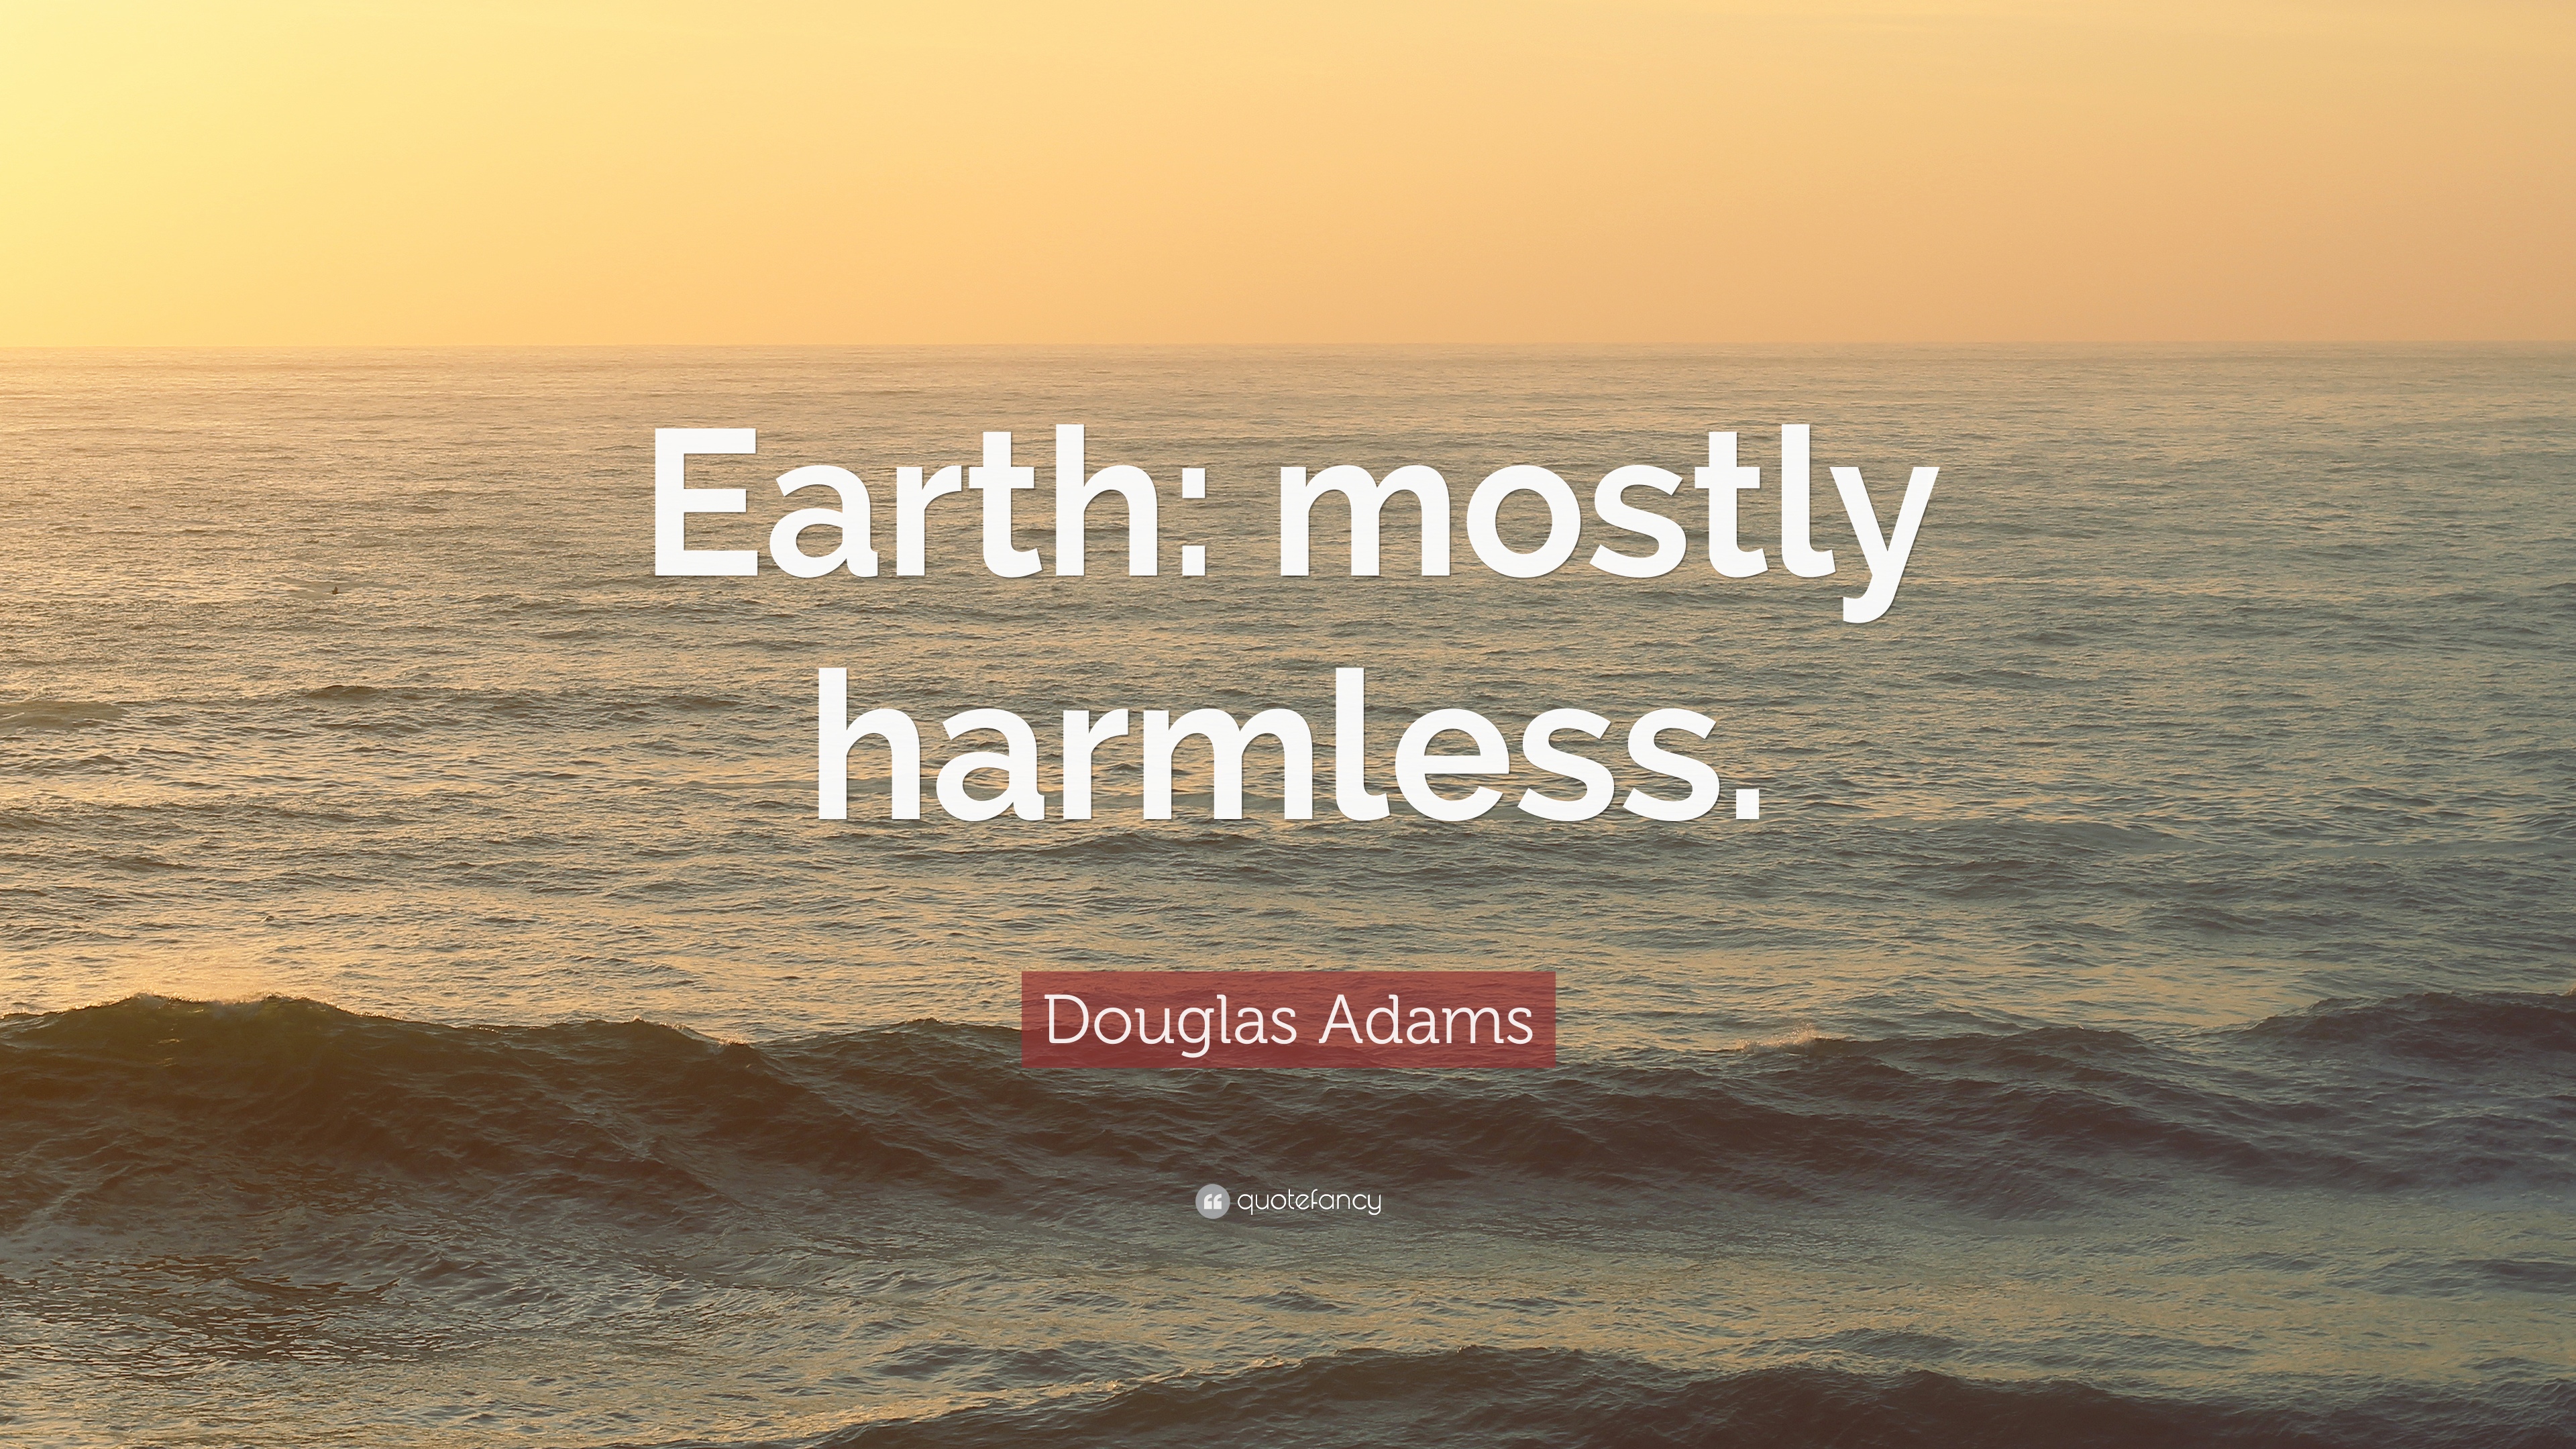 names for earth - done cannot be undone quotes - Earth mostly harmless. Douglas Adams celor